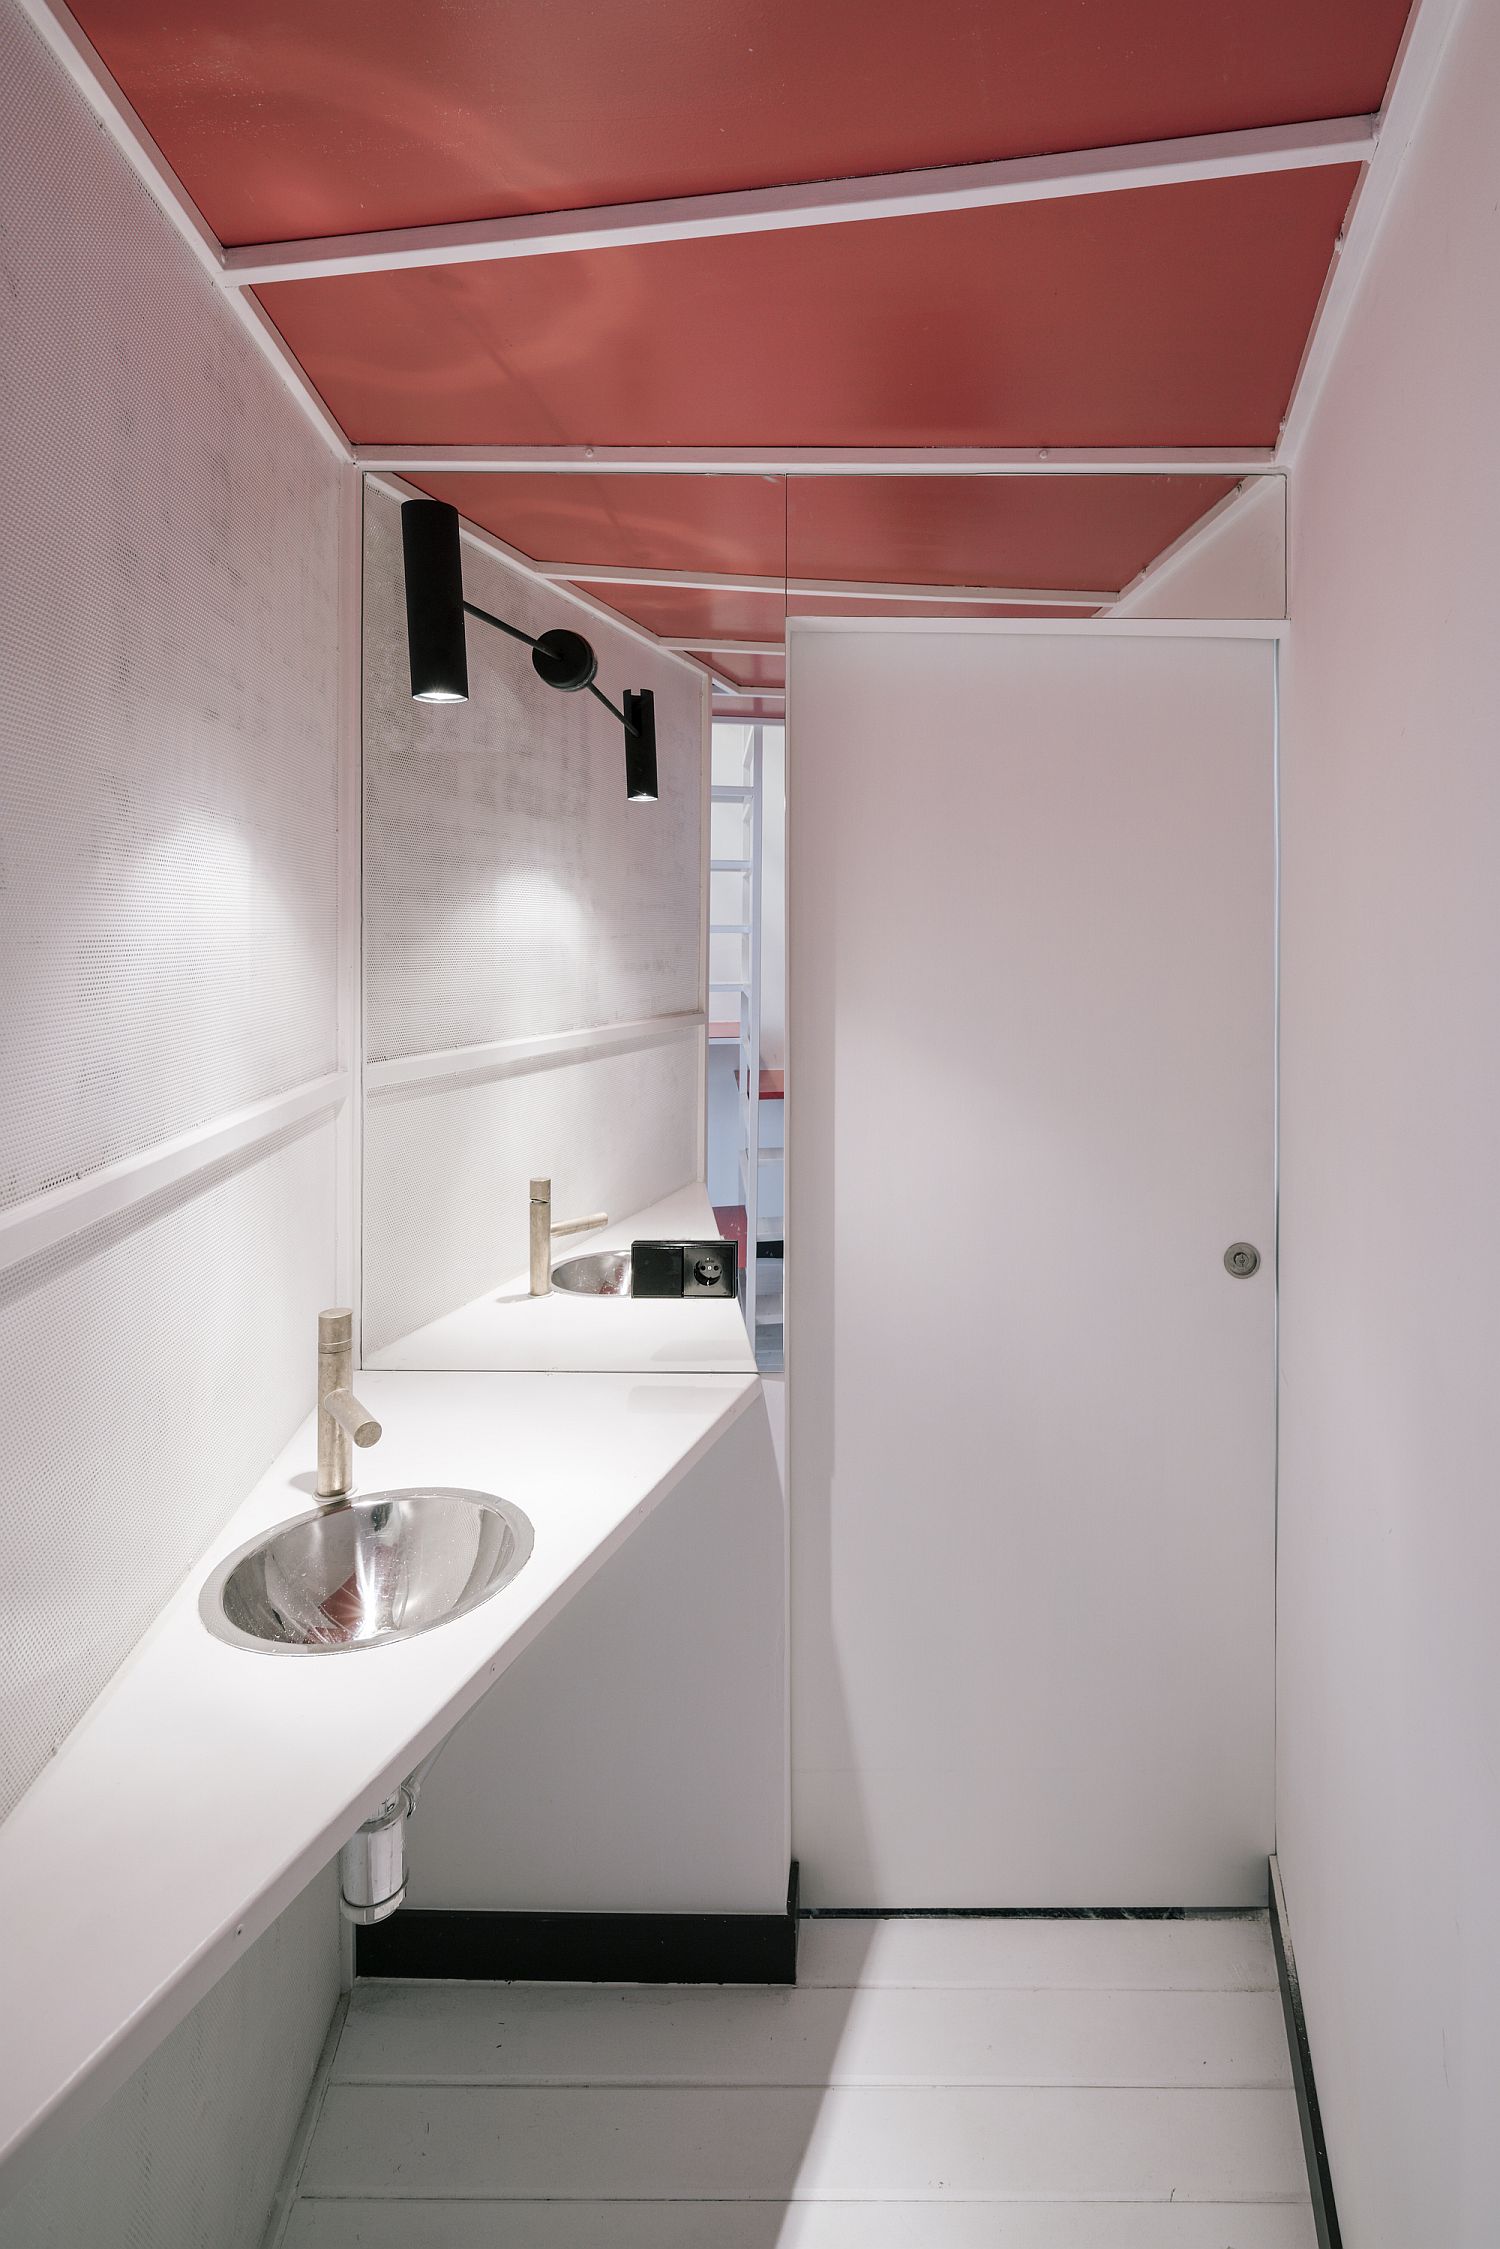 Bathroom with sliding door and a pink ceiling